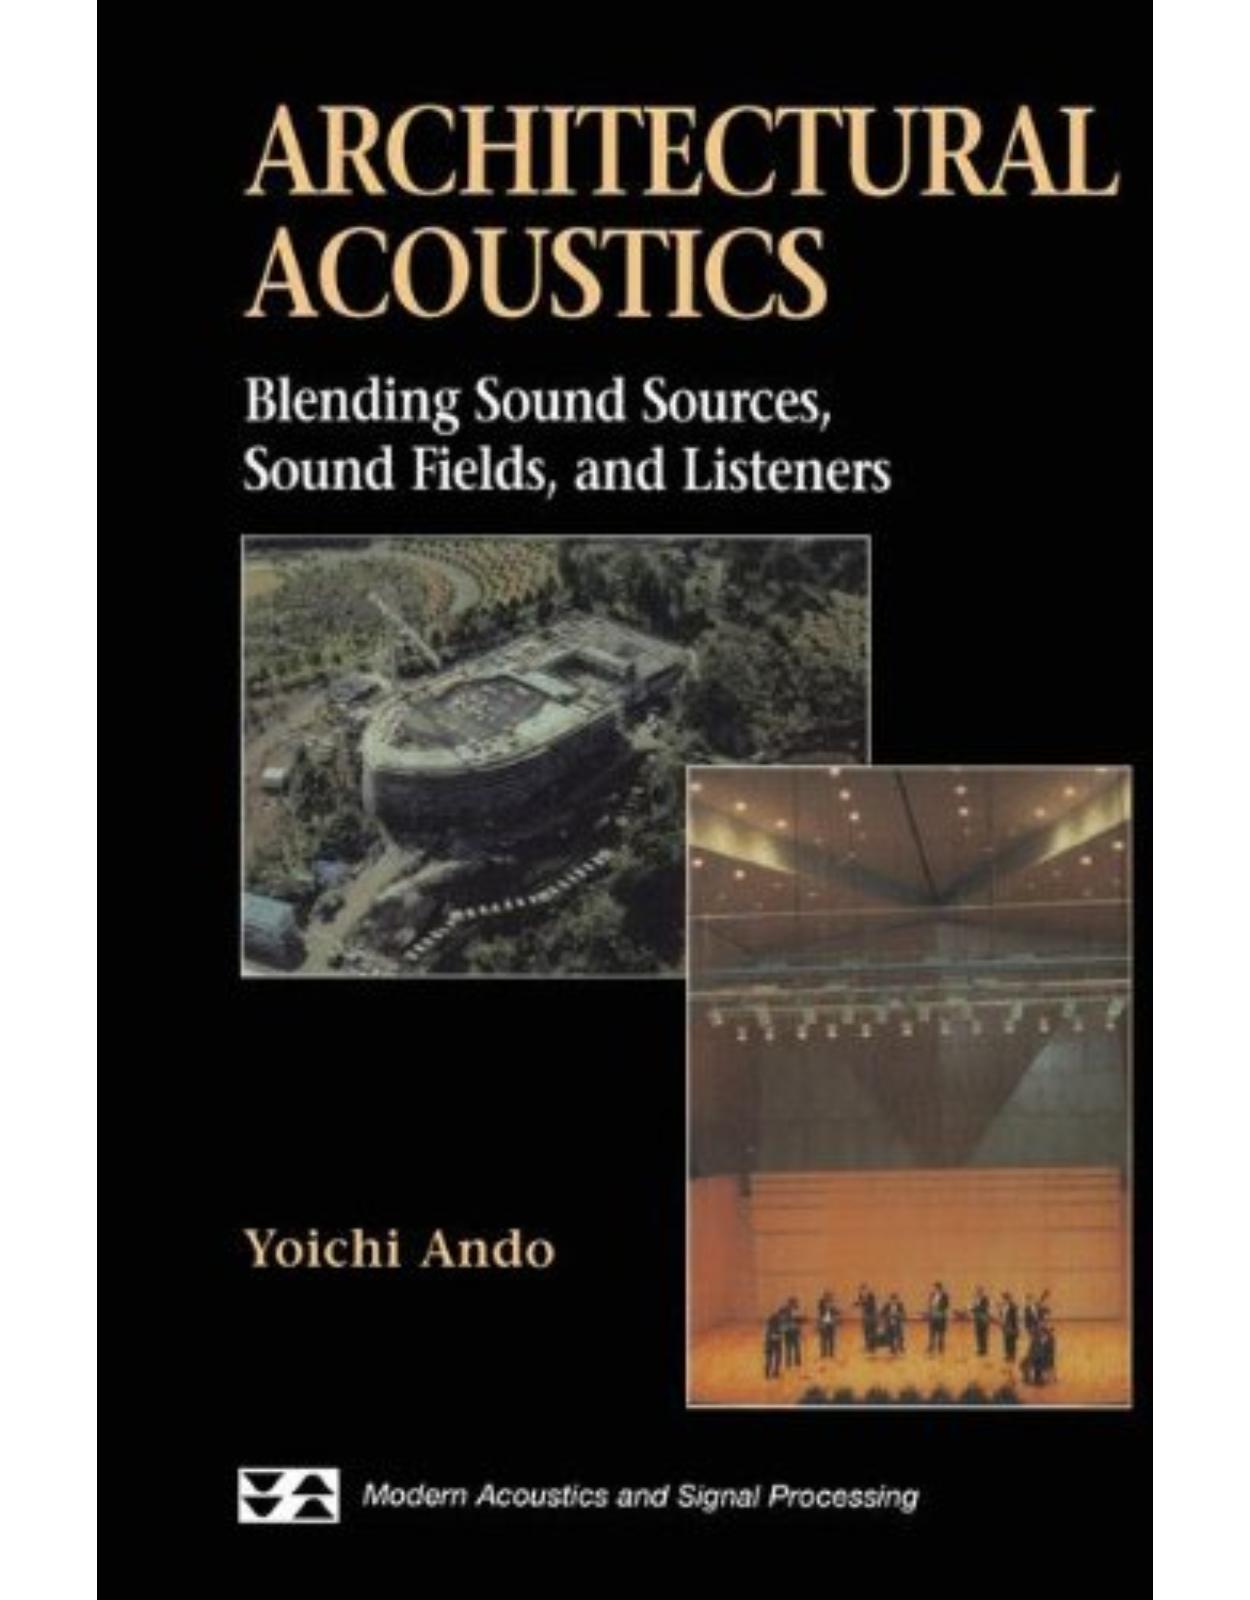 Architectural Acoustics: Blending Sound Sources, Sound Fields, and Listeners (Modern Acoustics and Signal Processing)